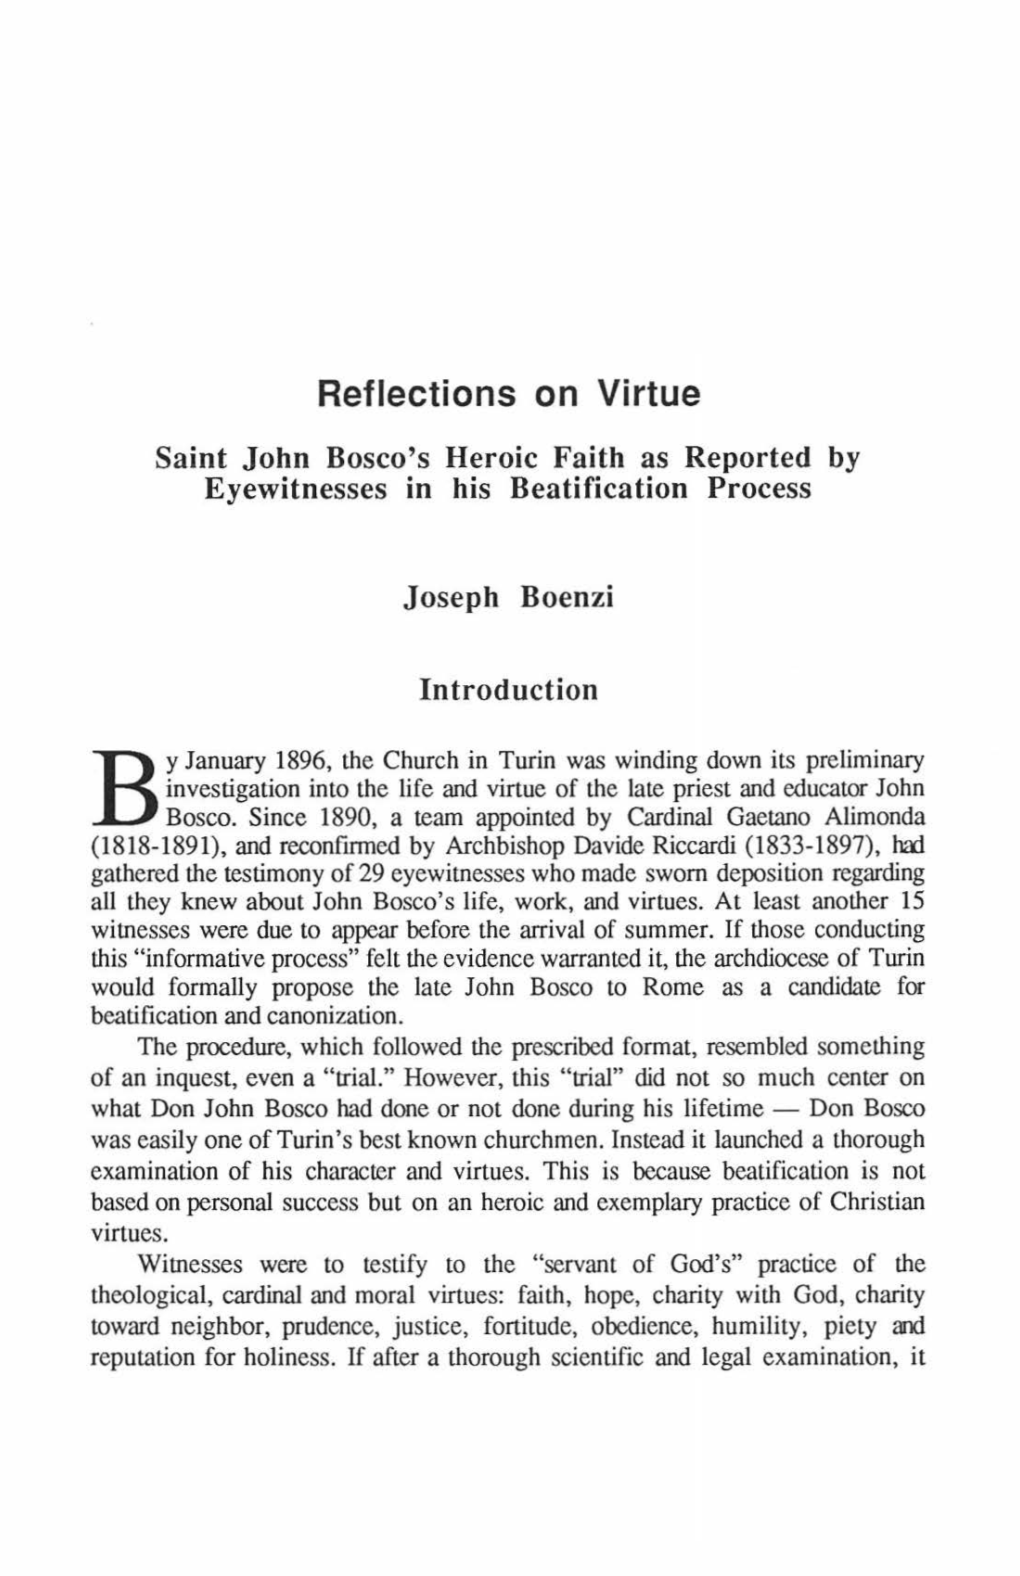 Reflections on Virtue Saint John Rosco's Heroic Faith As Reported by Eyewitnesses in His Beatification Process